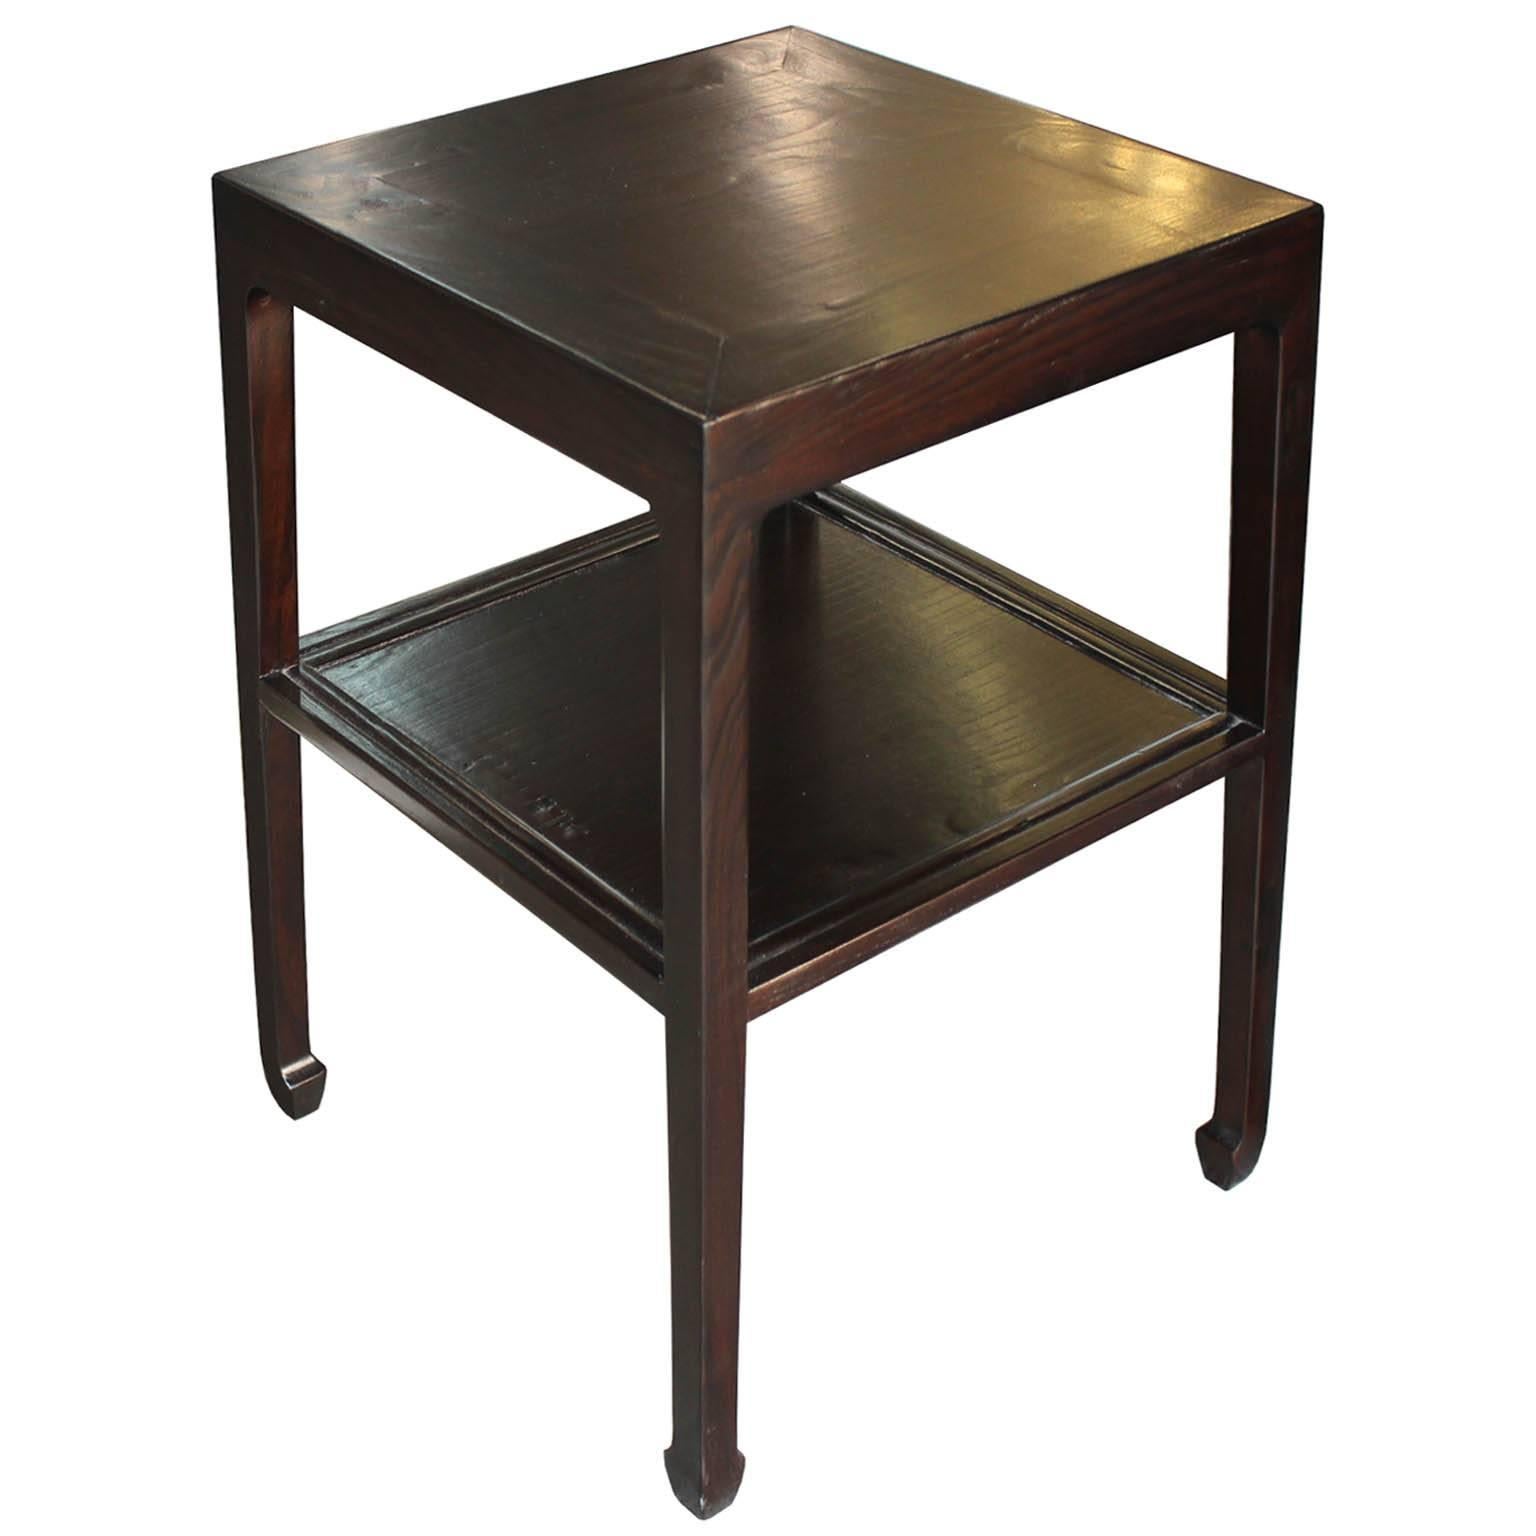 Contemporary two-tier ming style elm side table. Put two together for a unique coffee table.

 